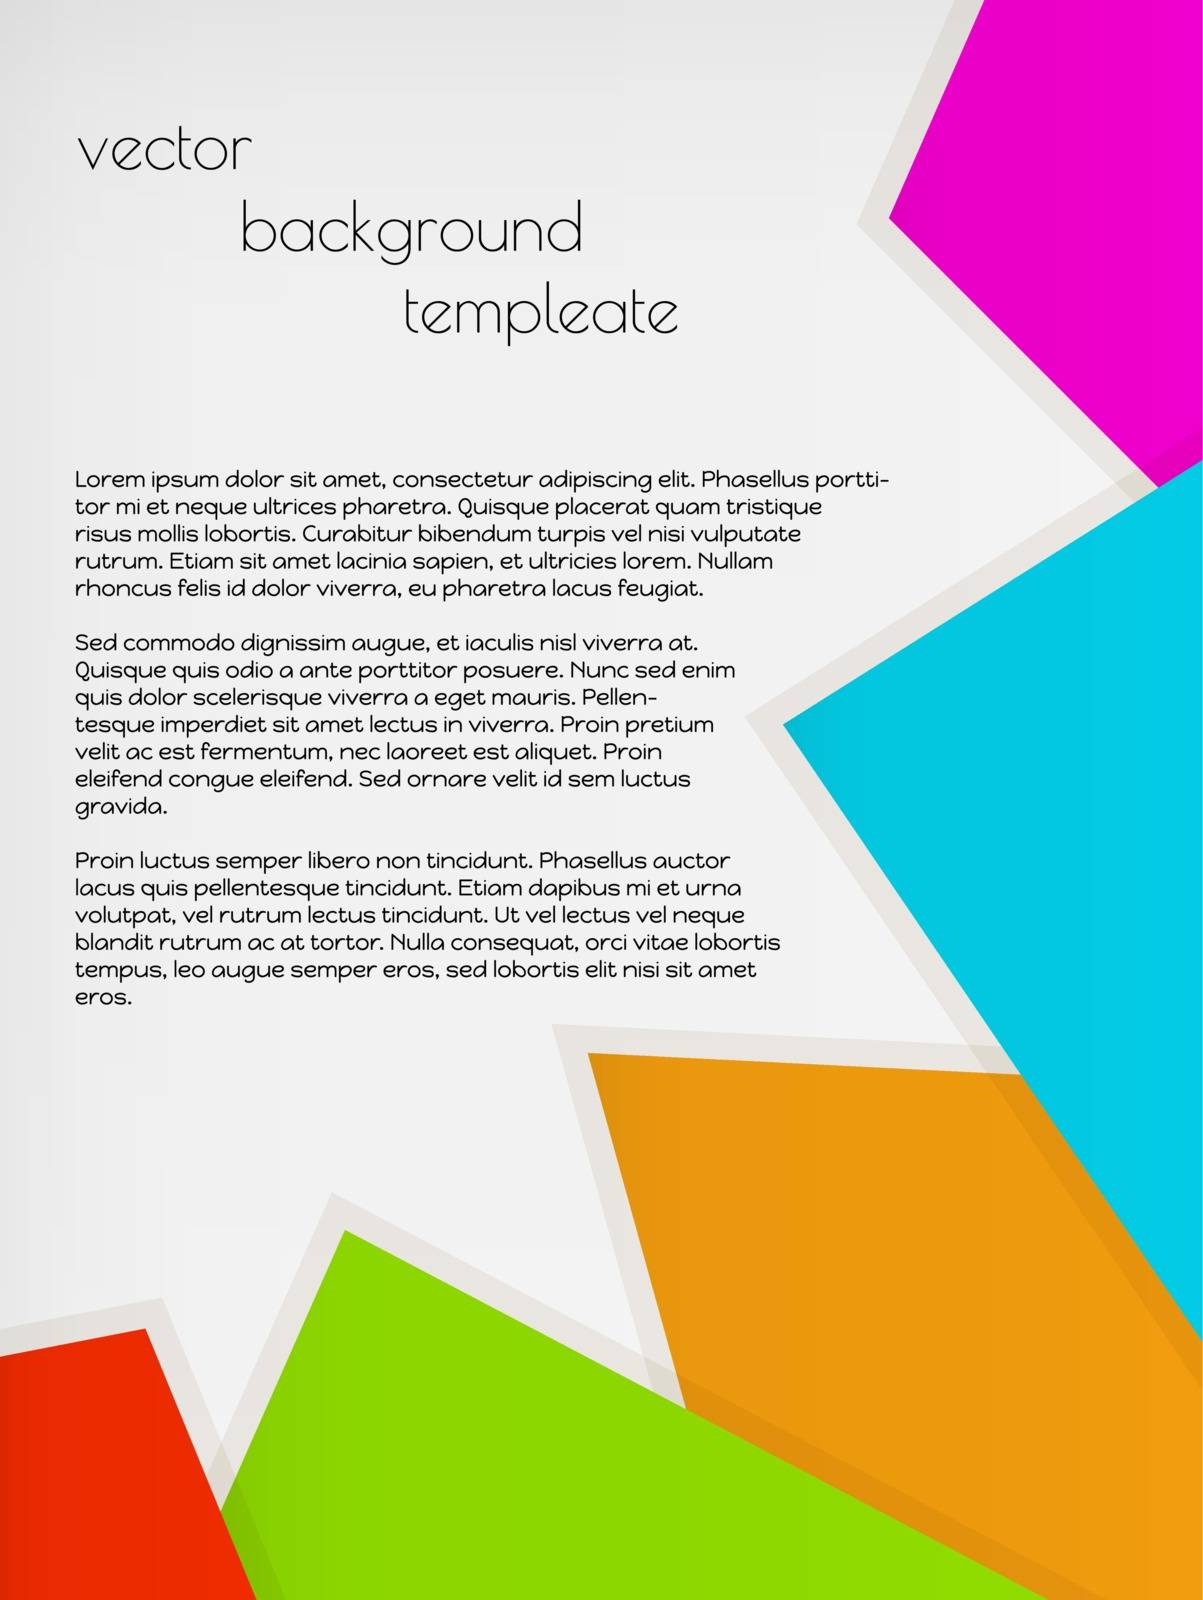 infographic background template with color triangles on gray background